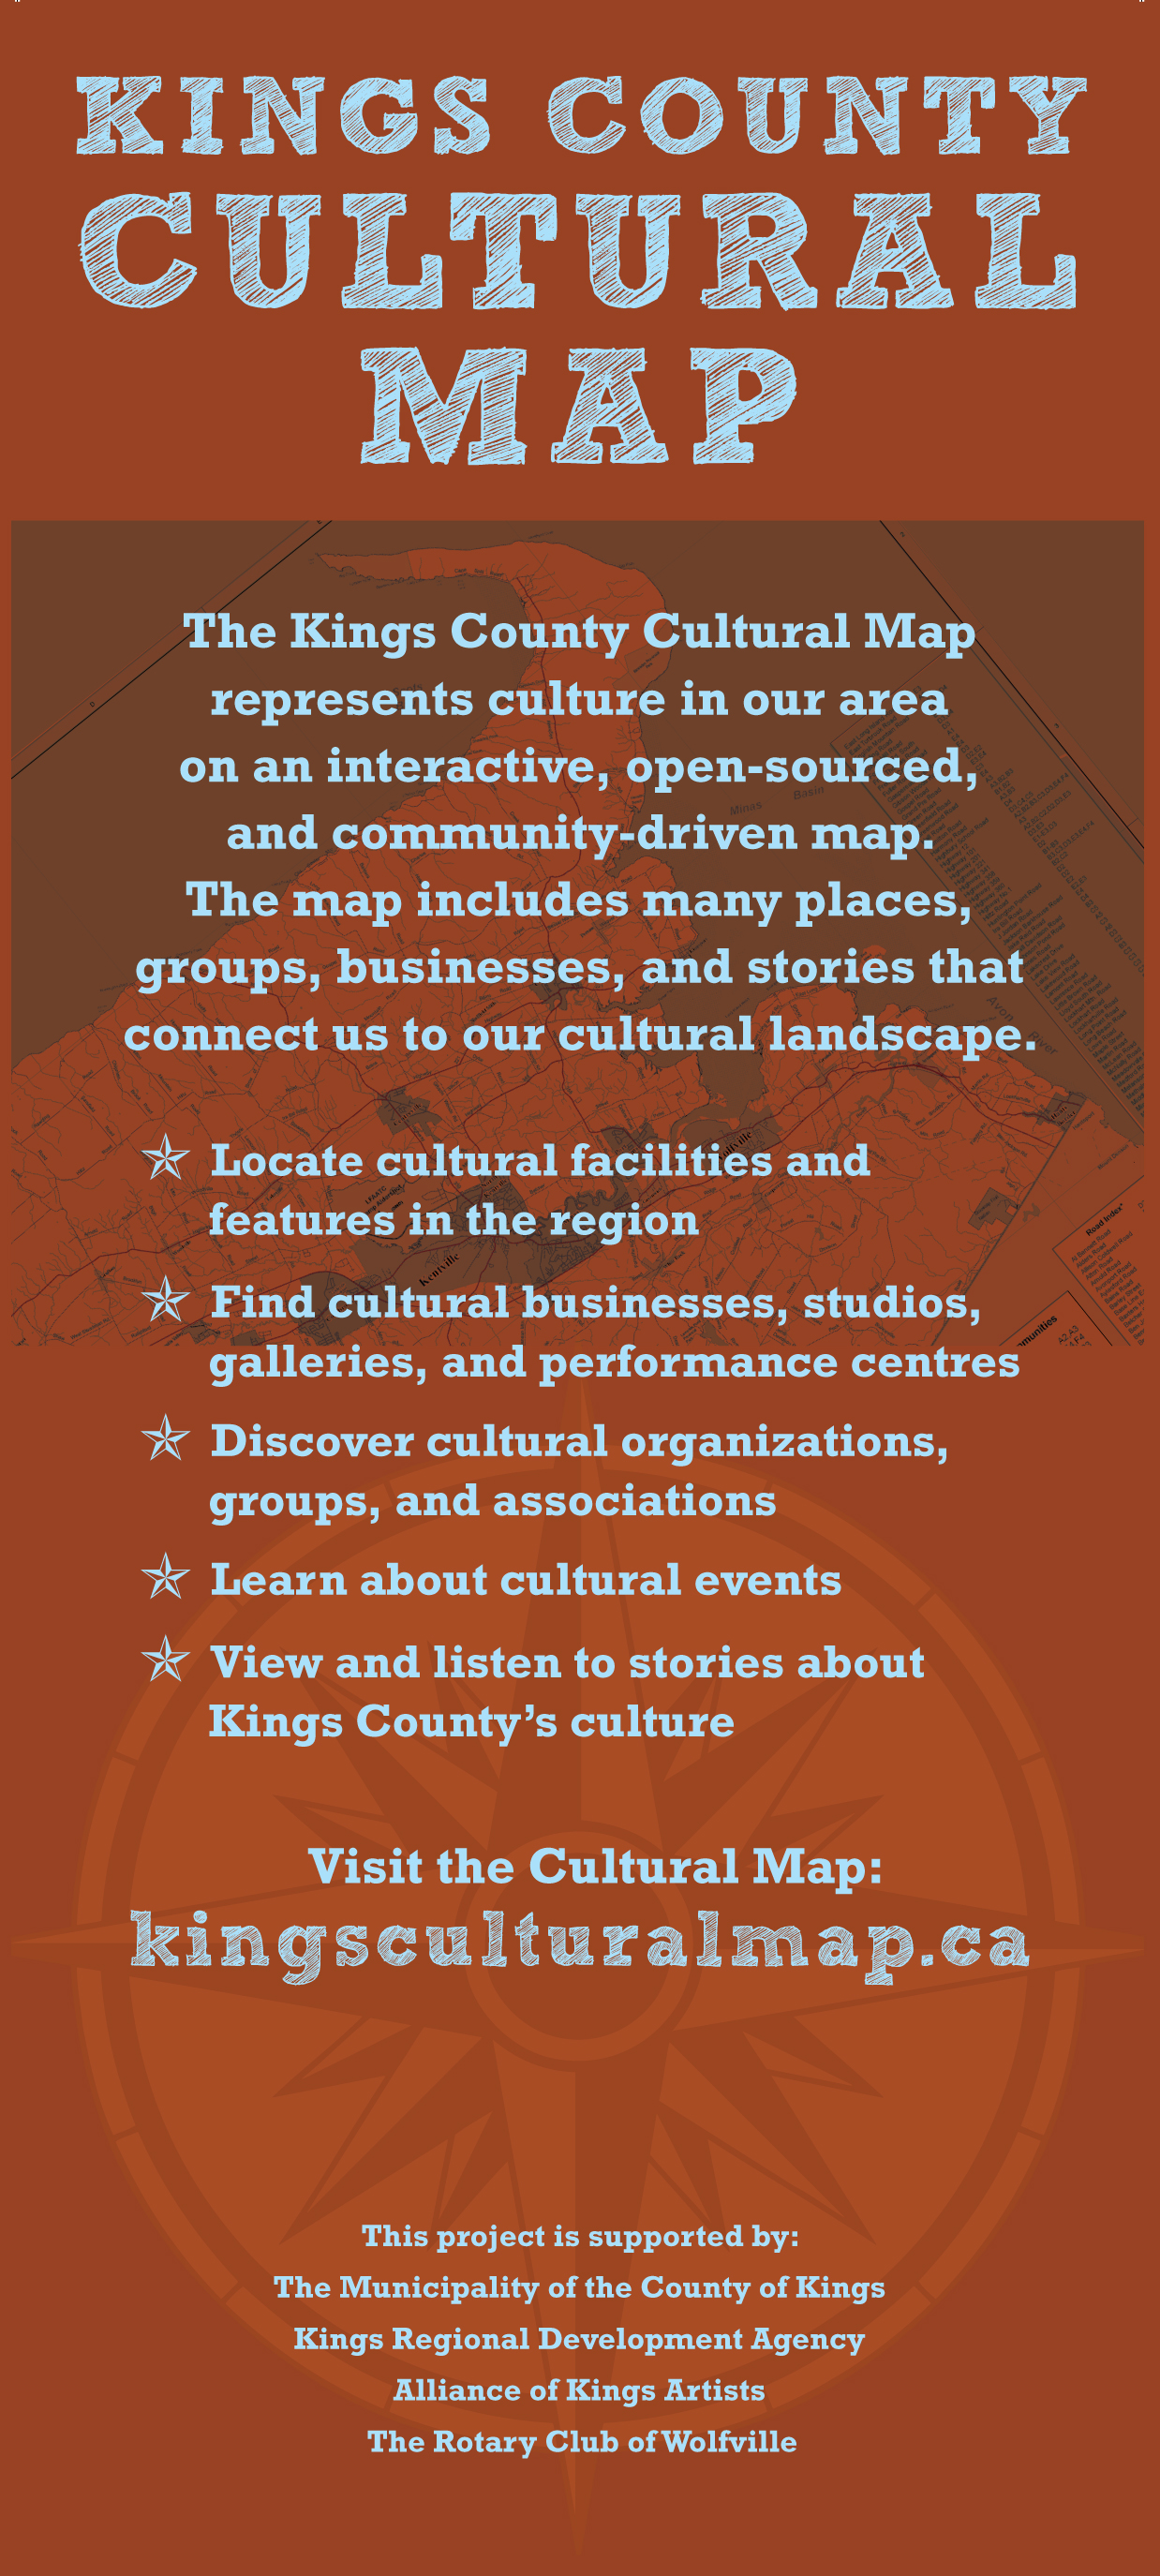 The Kings County Cultural Map